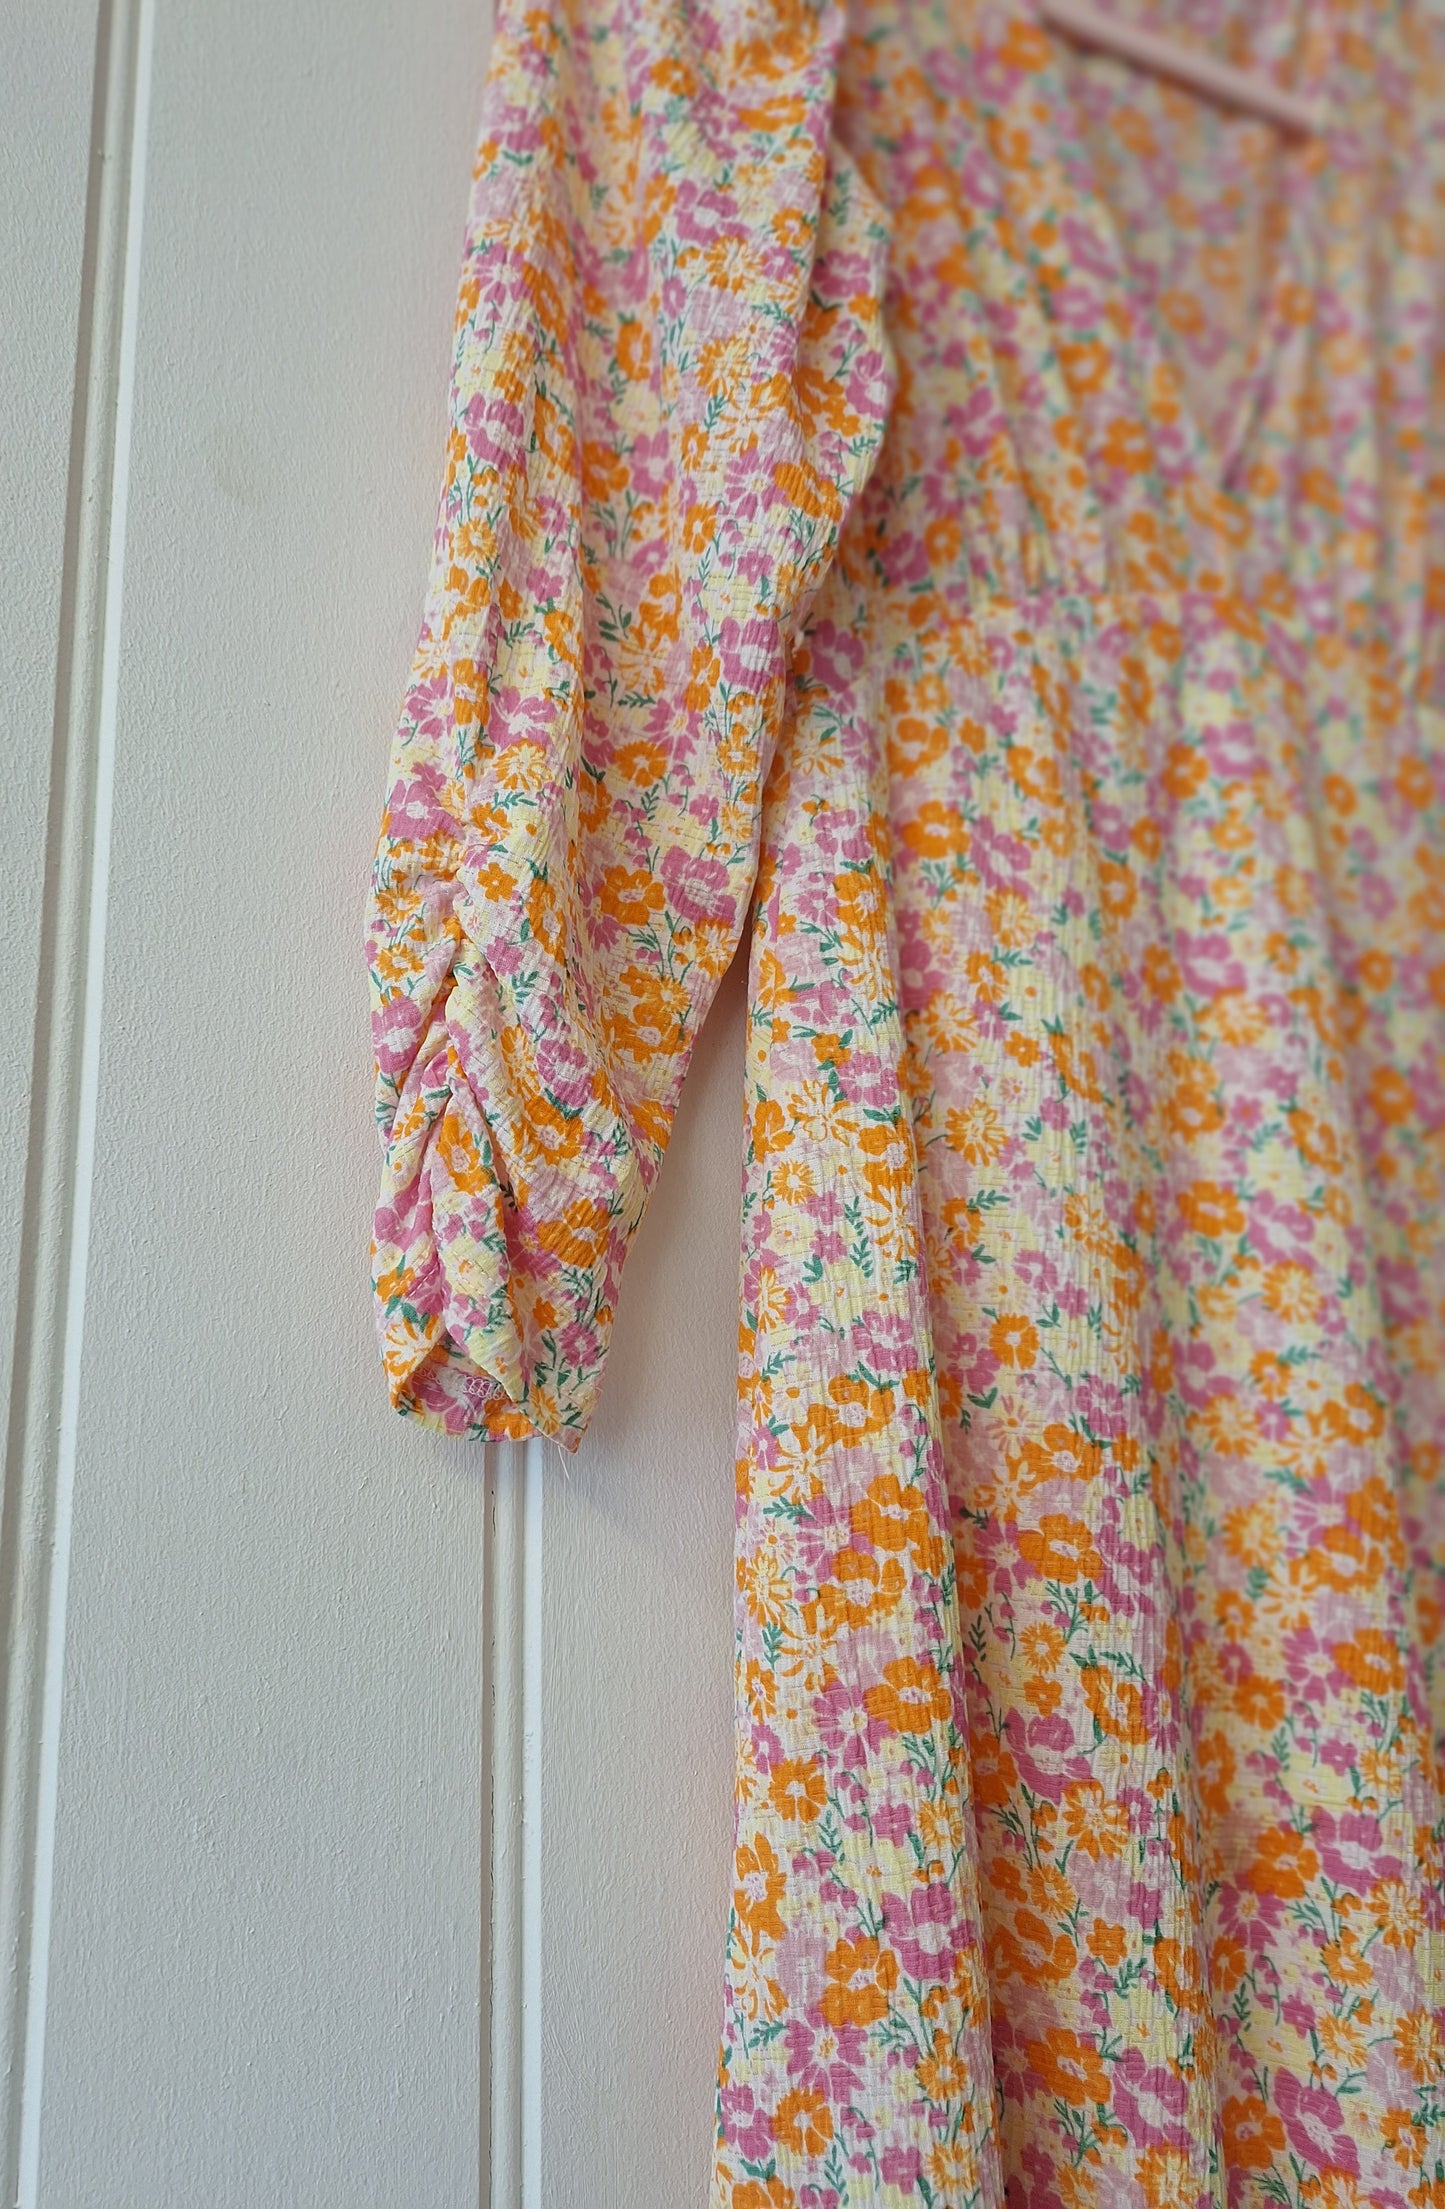 ONLY orange and pink ditsy print dress S